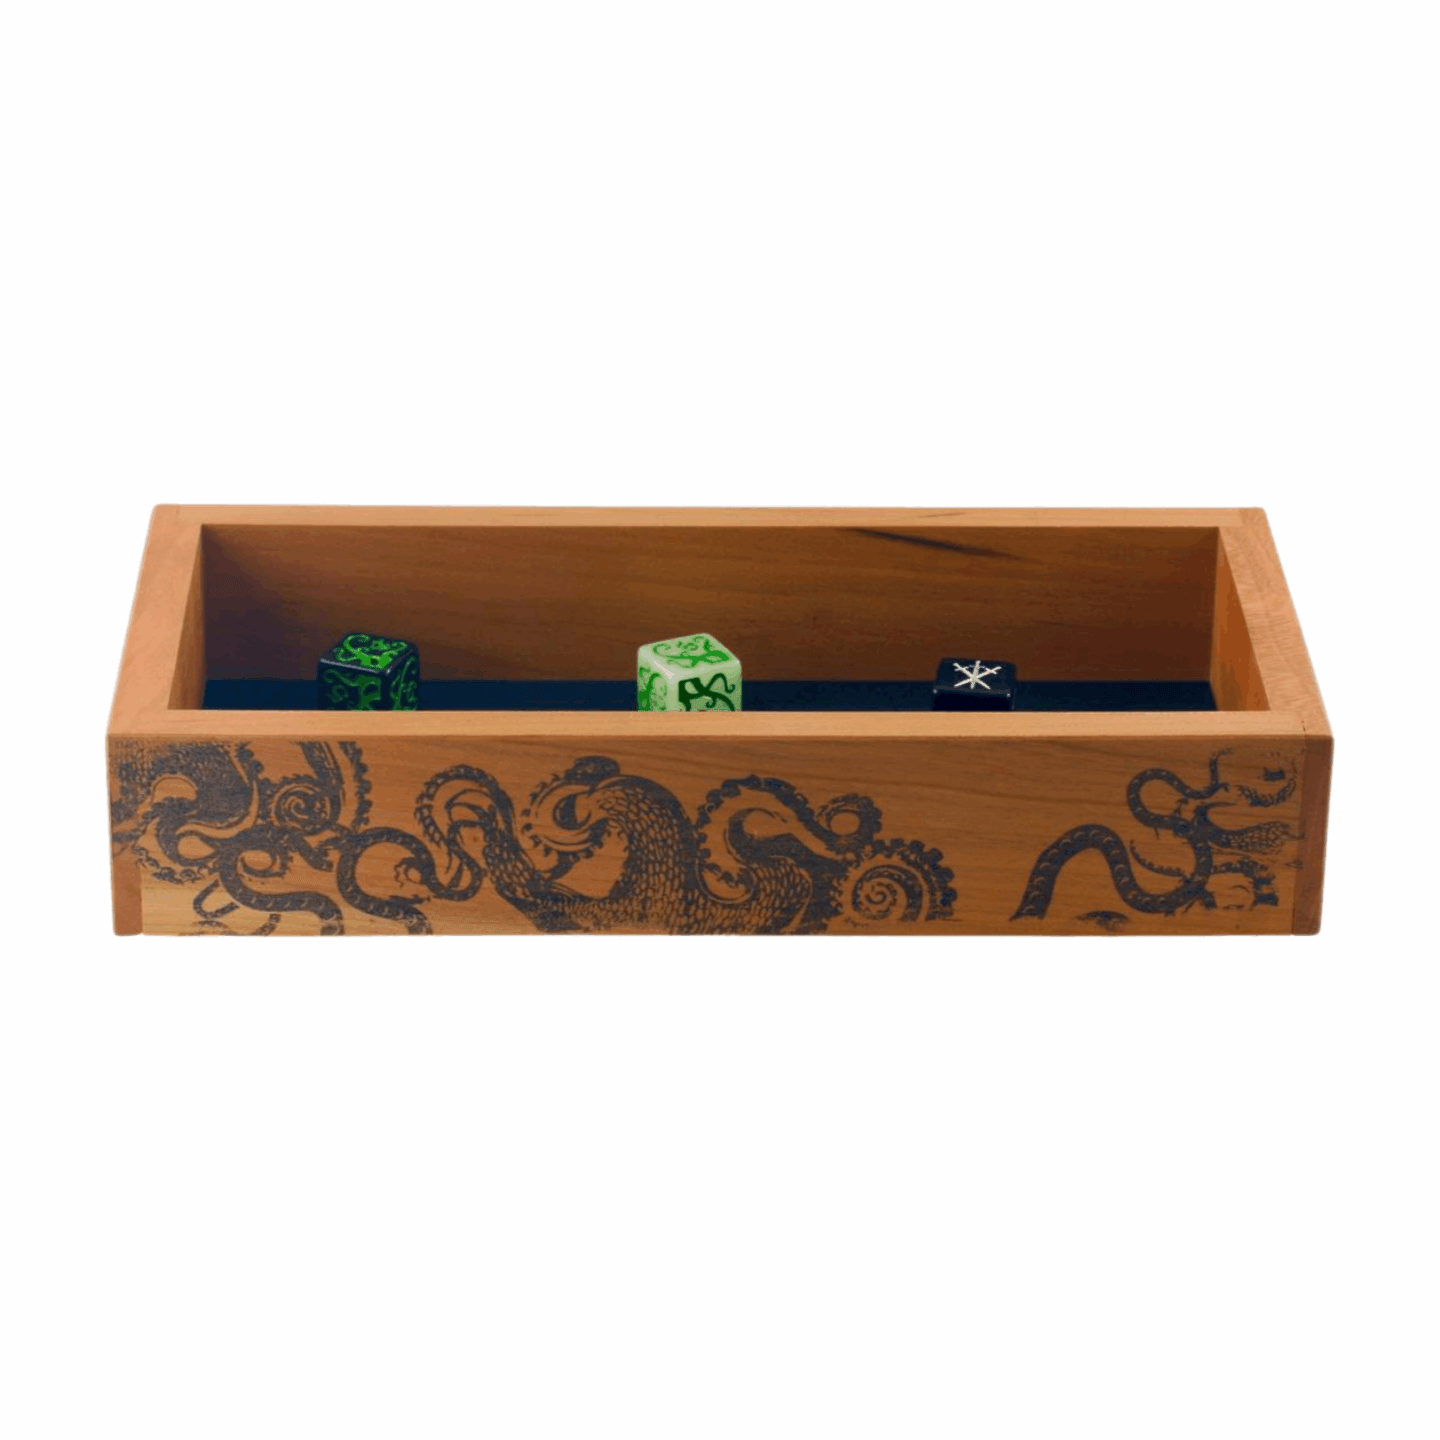 Medium Cherry Dice Tray with Tentacle Design for Tabletop Gaming - Dragon Armor Games